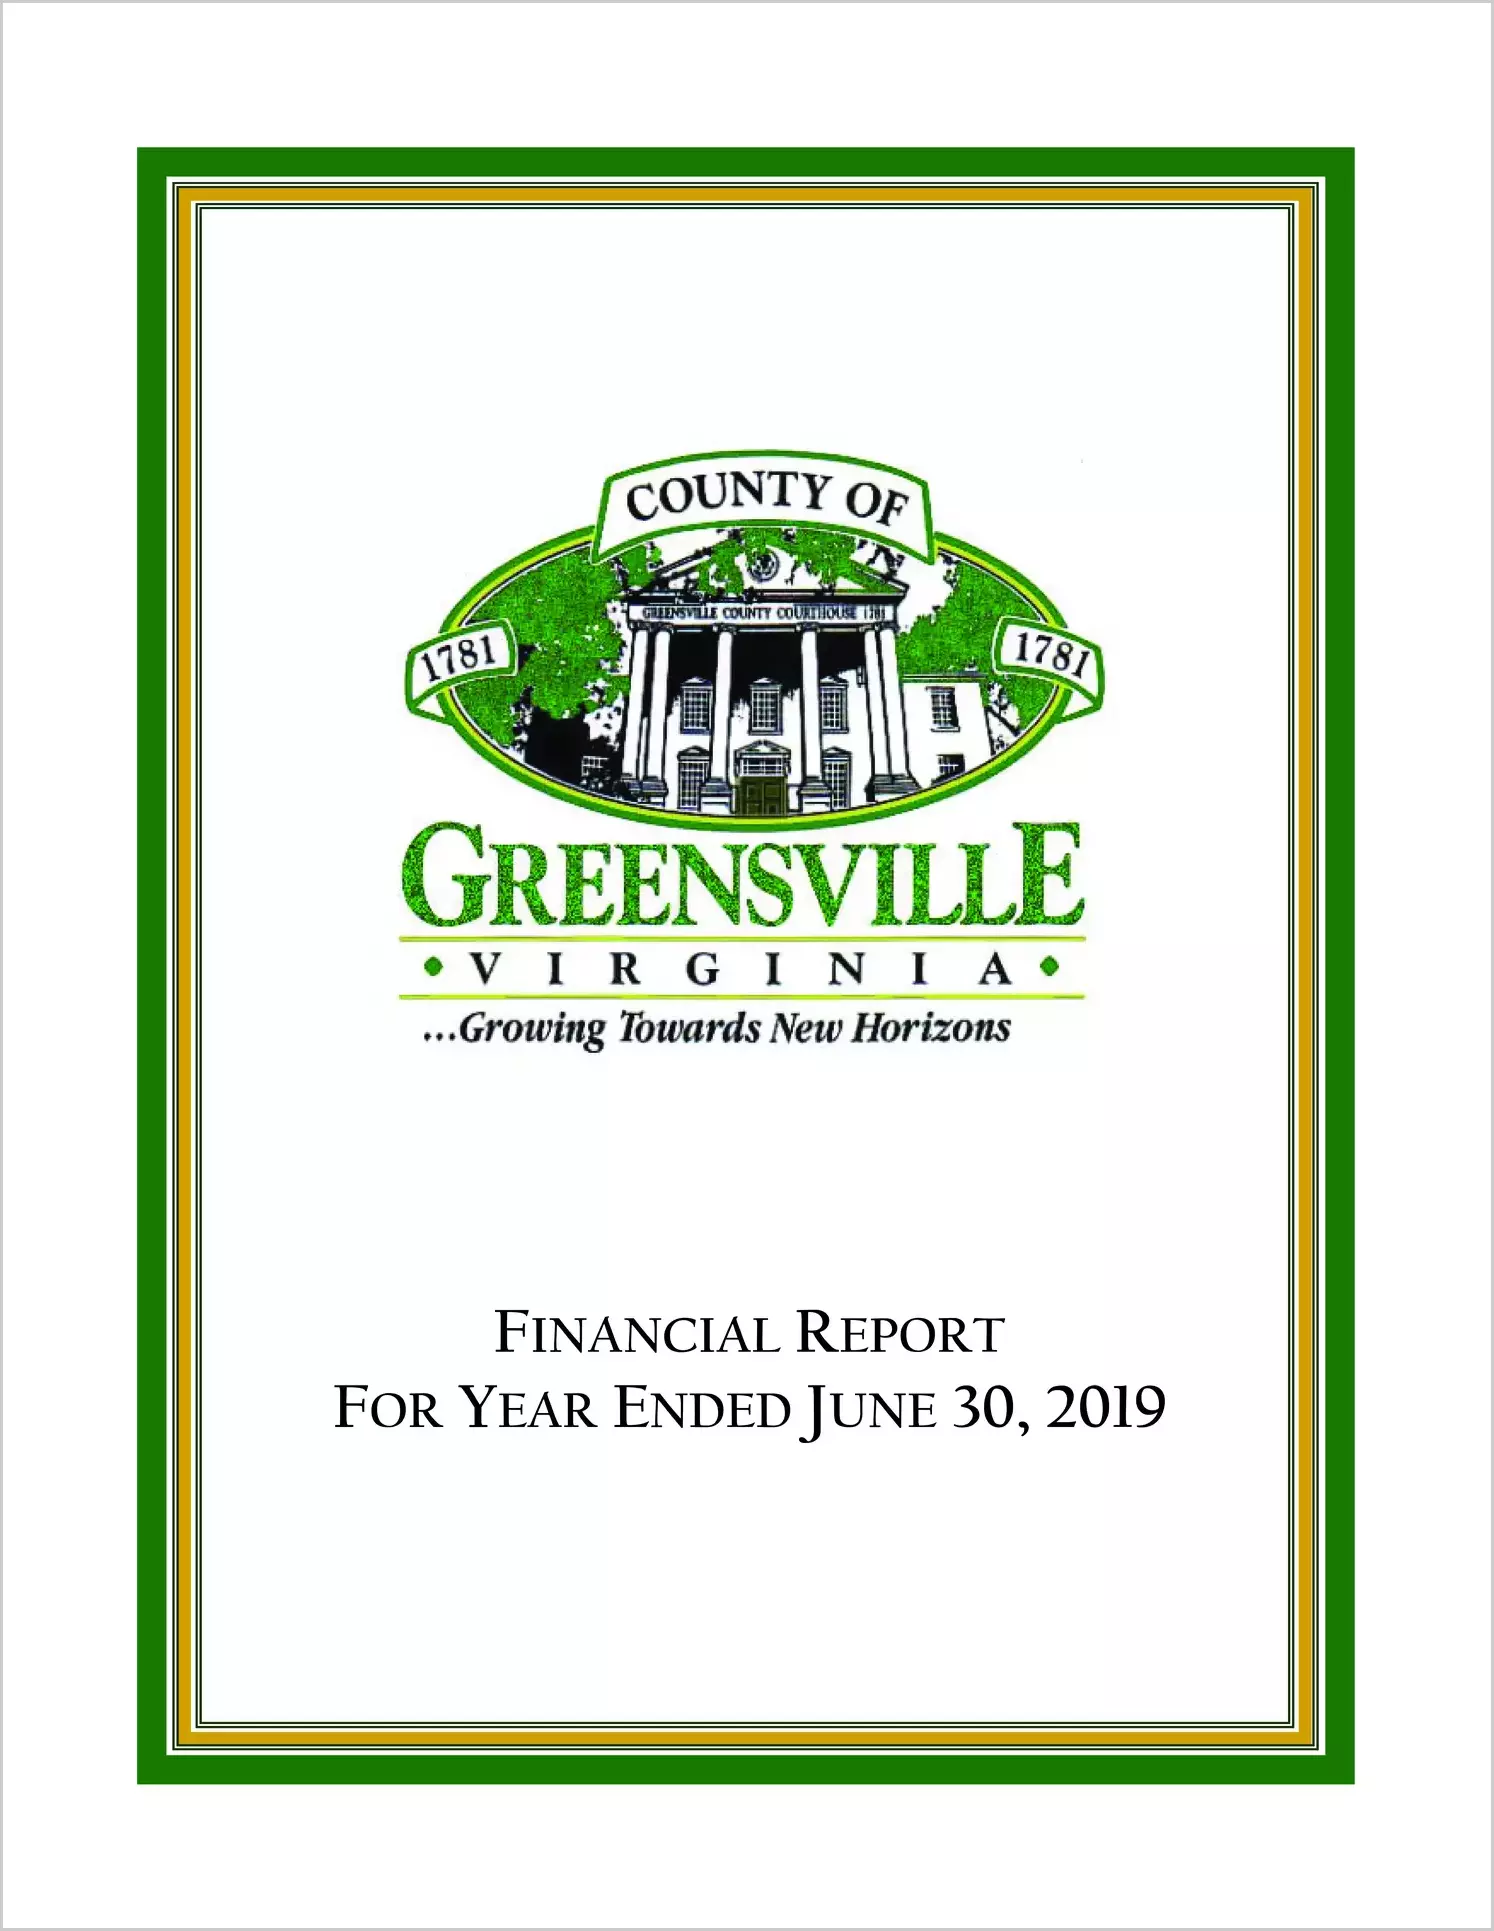 2019 Annual Financial Report for County of Greensville